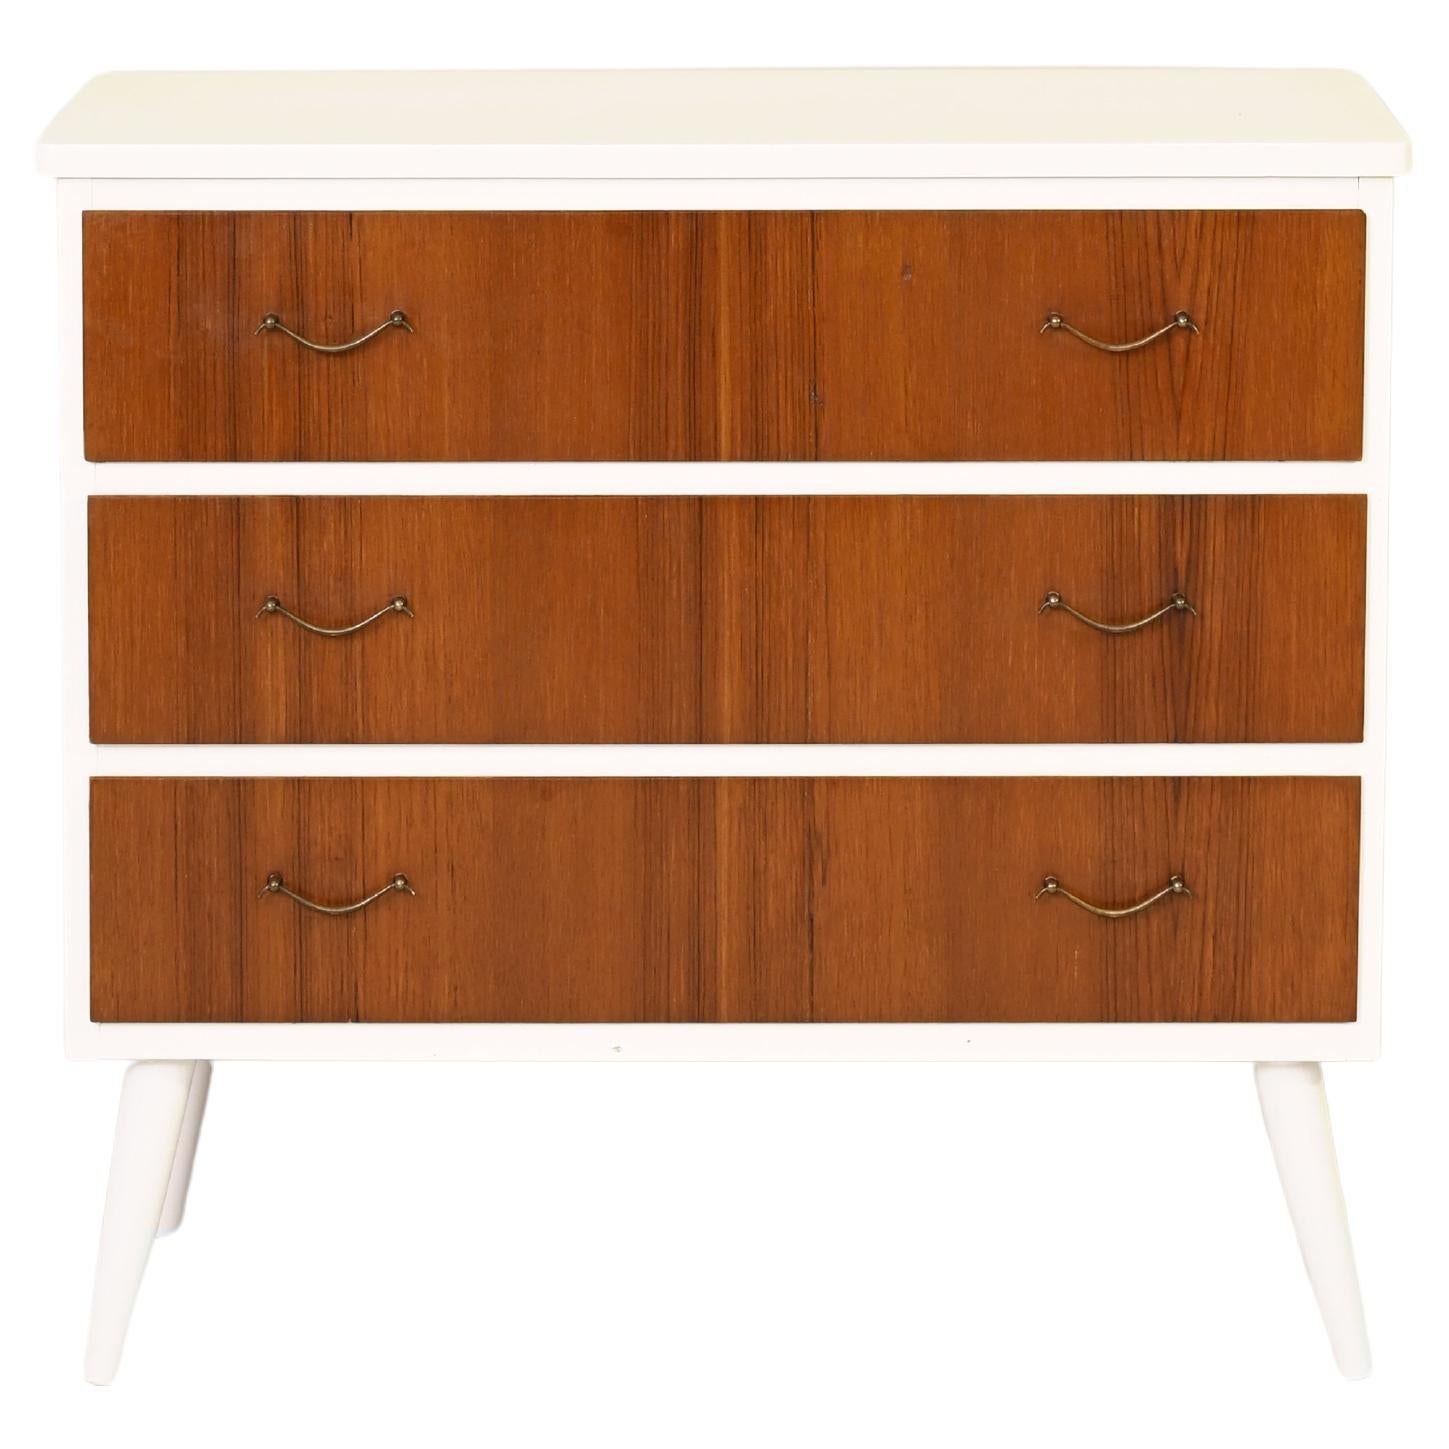 Vintage chest of drawers with white frame